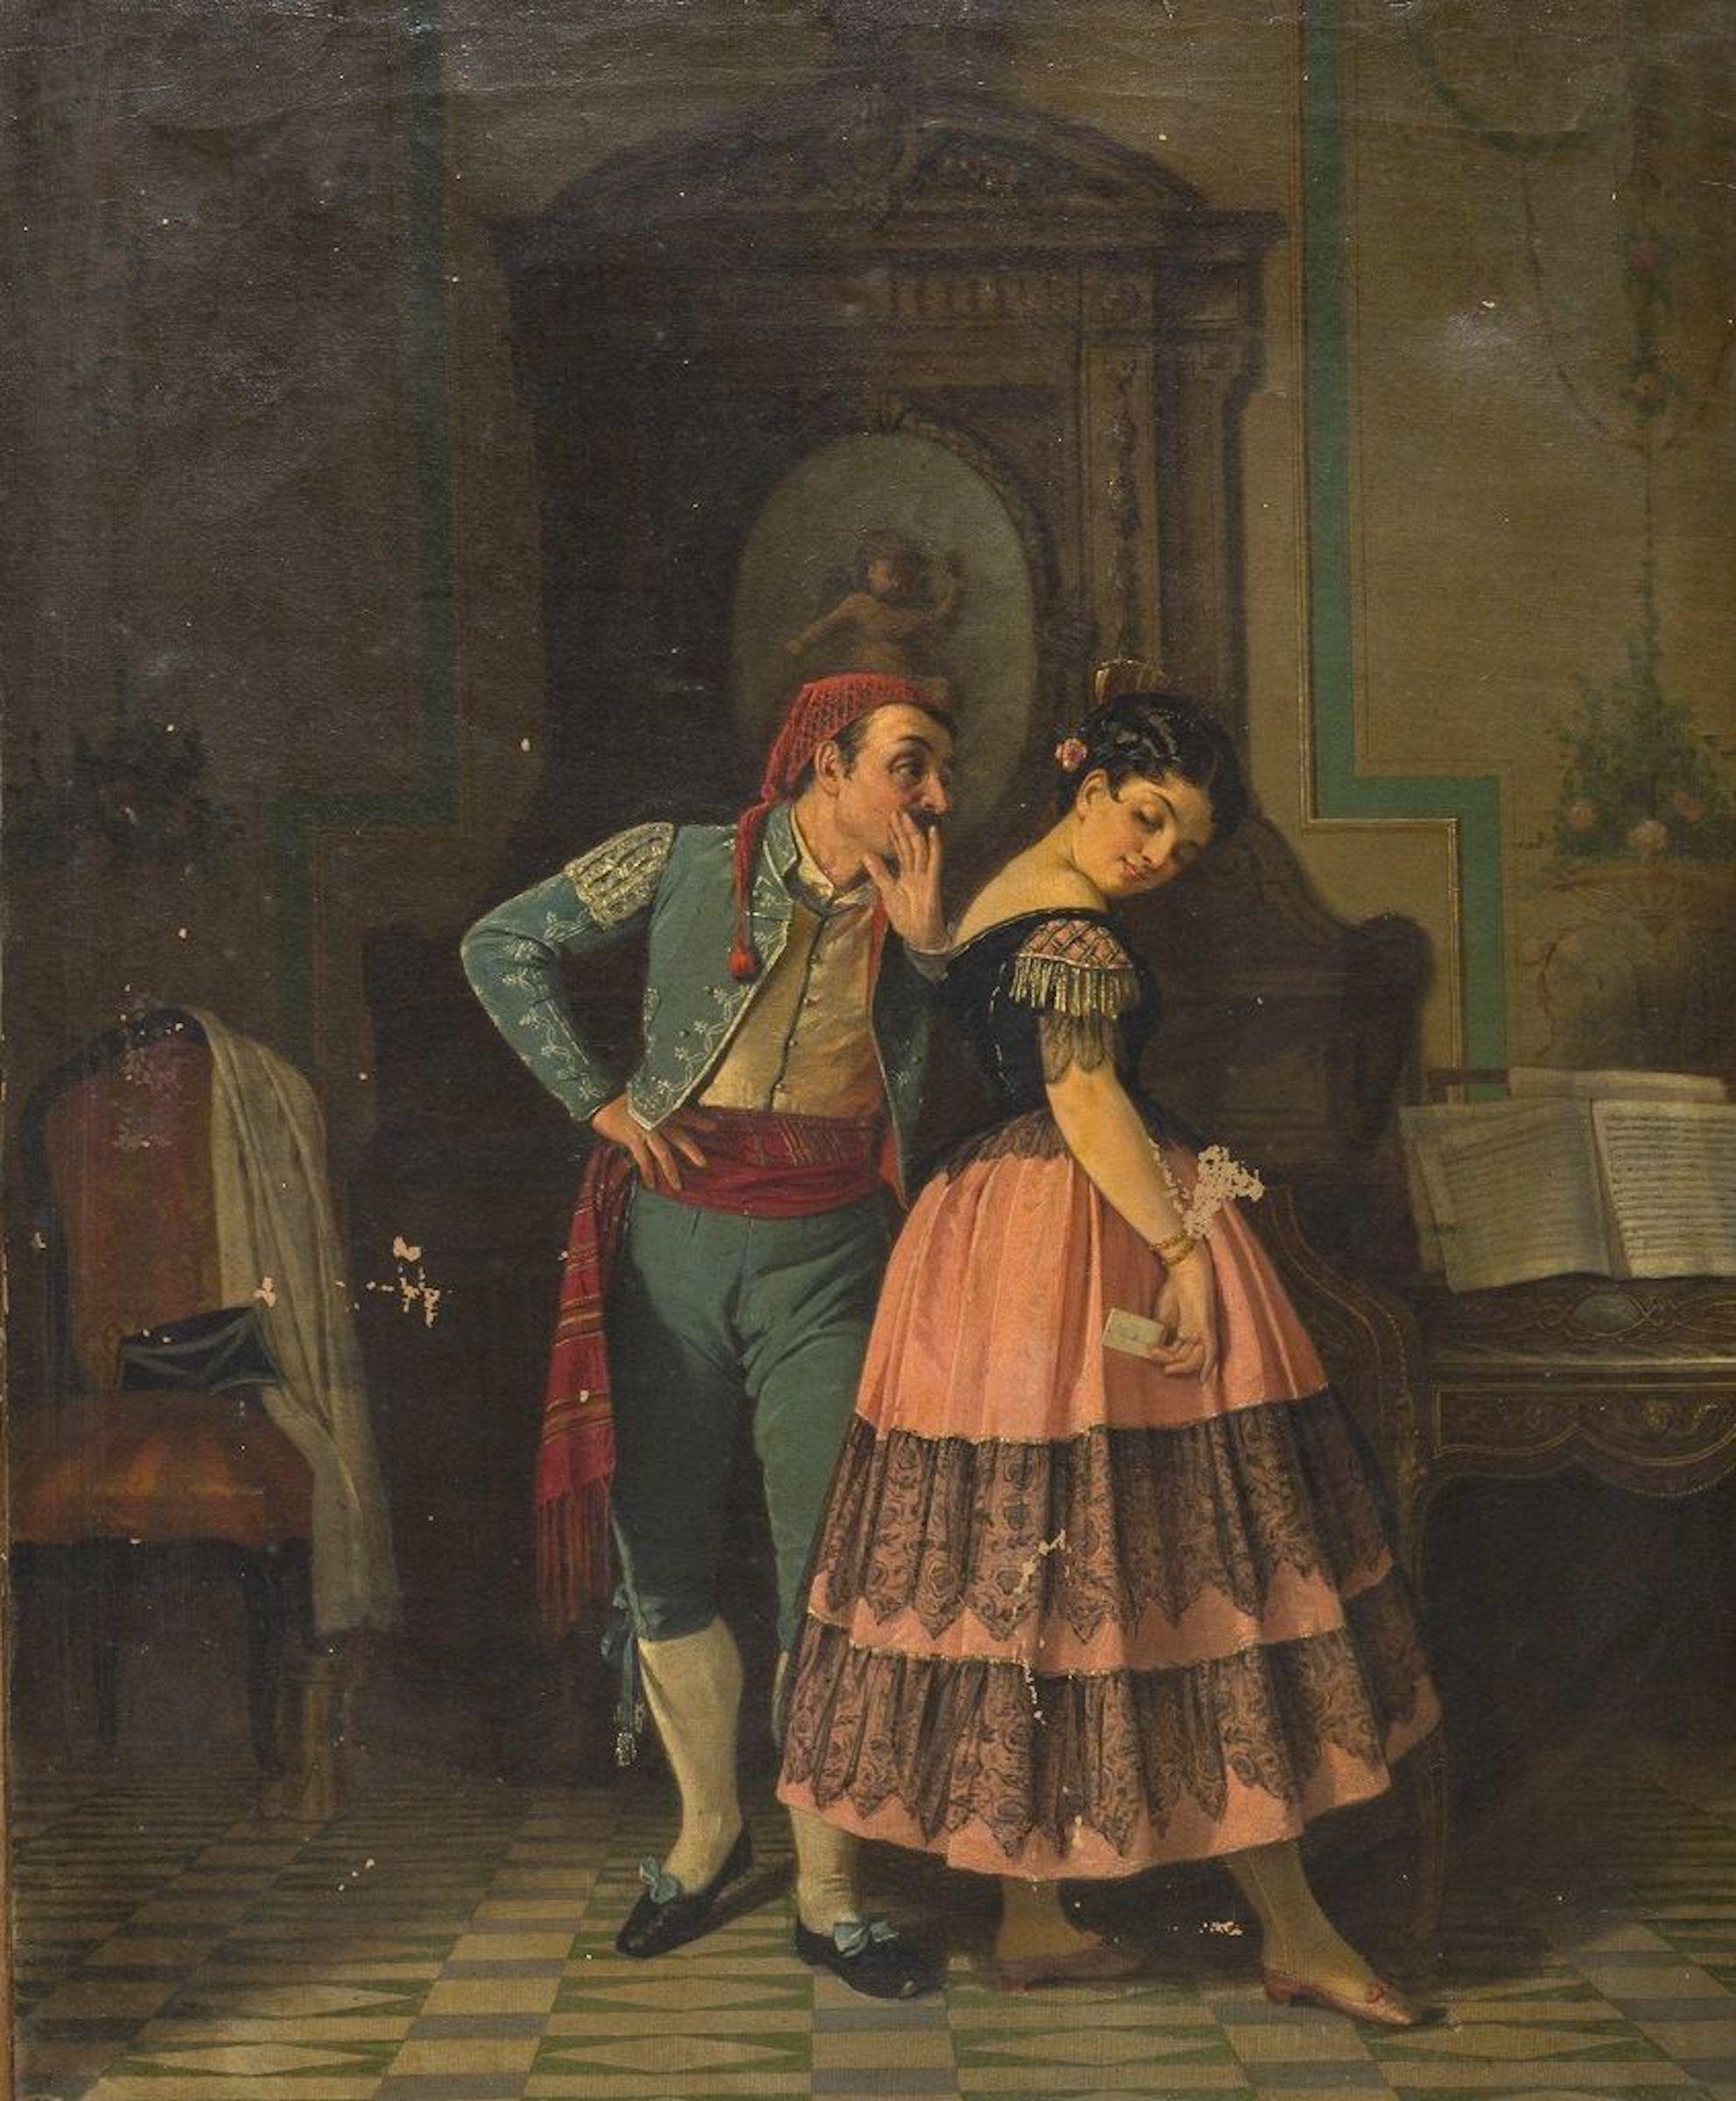 Unknown Figurative Painting - Gallant Scene in Spanish Costume-Oil on Canvas by Neapolitan Artist 19th Century